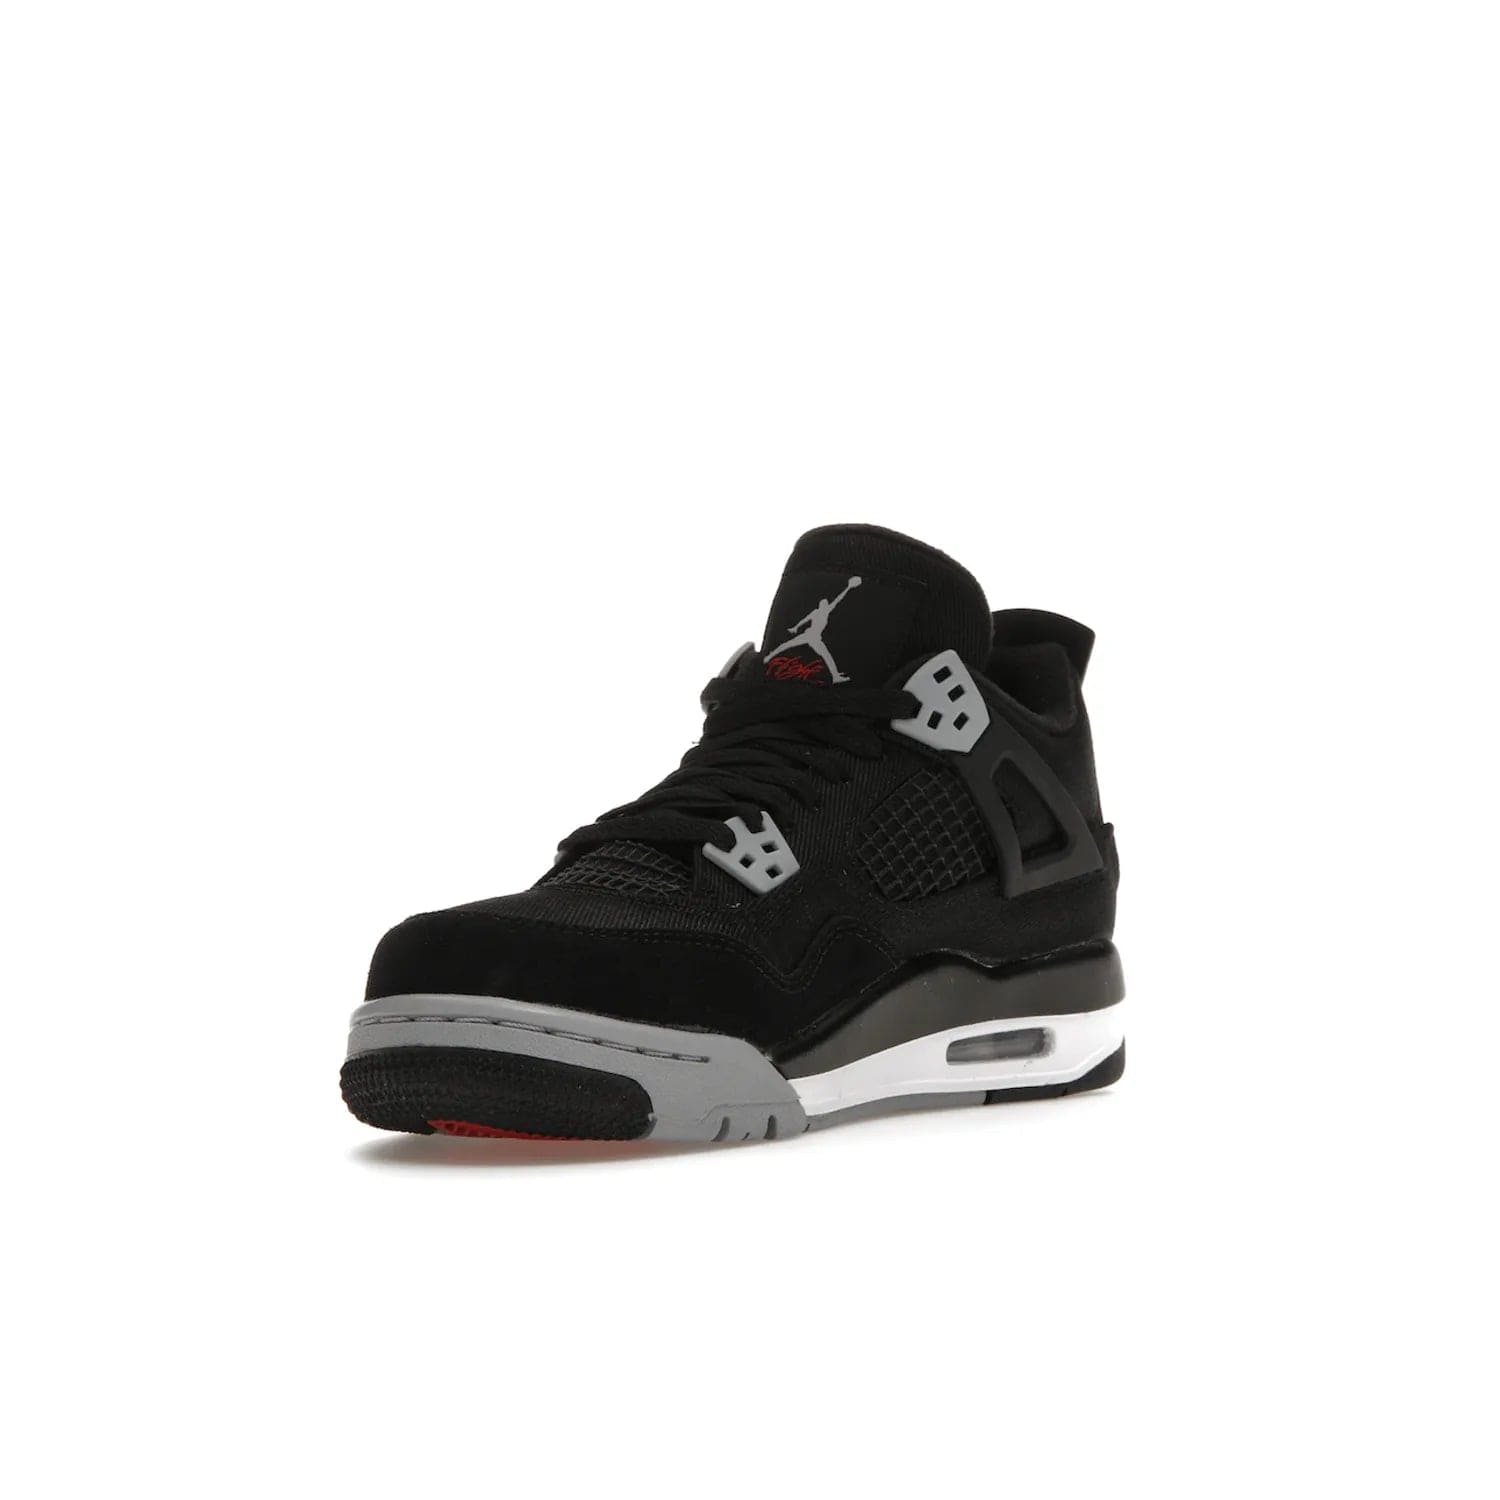 Jordan 4 Retro Black Canvas (GS) - Image 14 - Only at www.BallersClubKickz.com - Premium Air Jordan 4 Retro Black Canvas in grade-schooler's catalog. Featuring black suede canvas upper, grey molding, accents in red, white midsole, woven Jumpman tag, & visible AIR cushioning. Releasing Oct. 1, 2022.